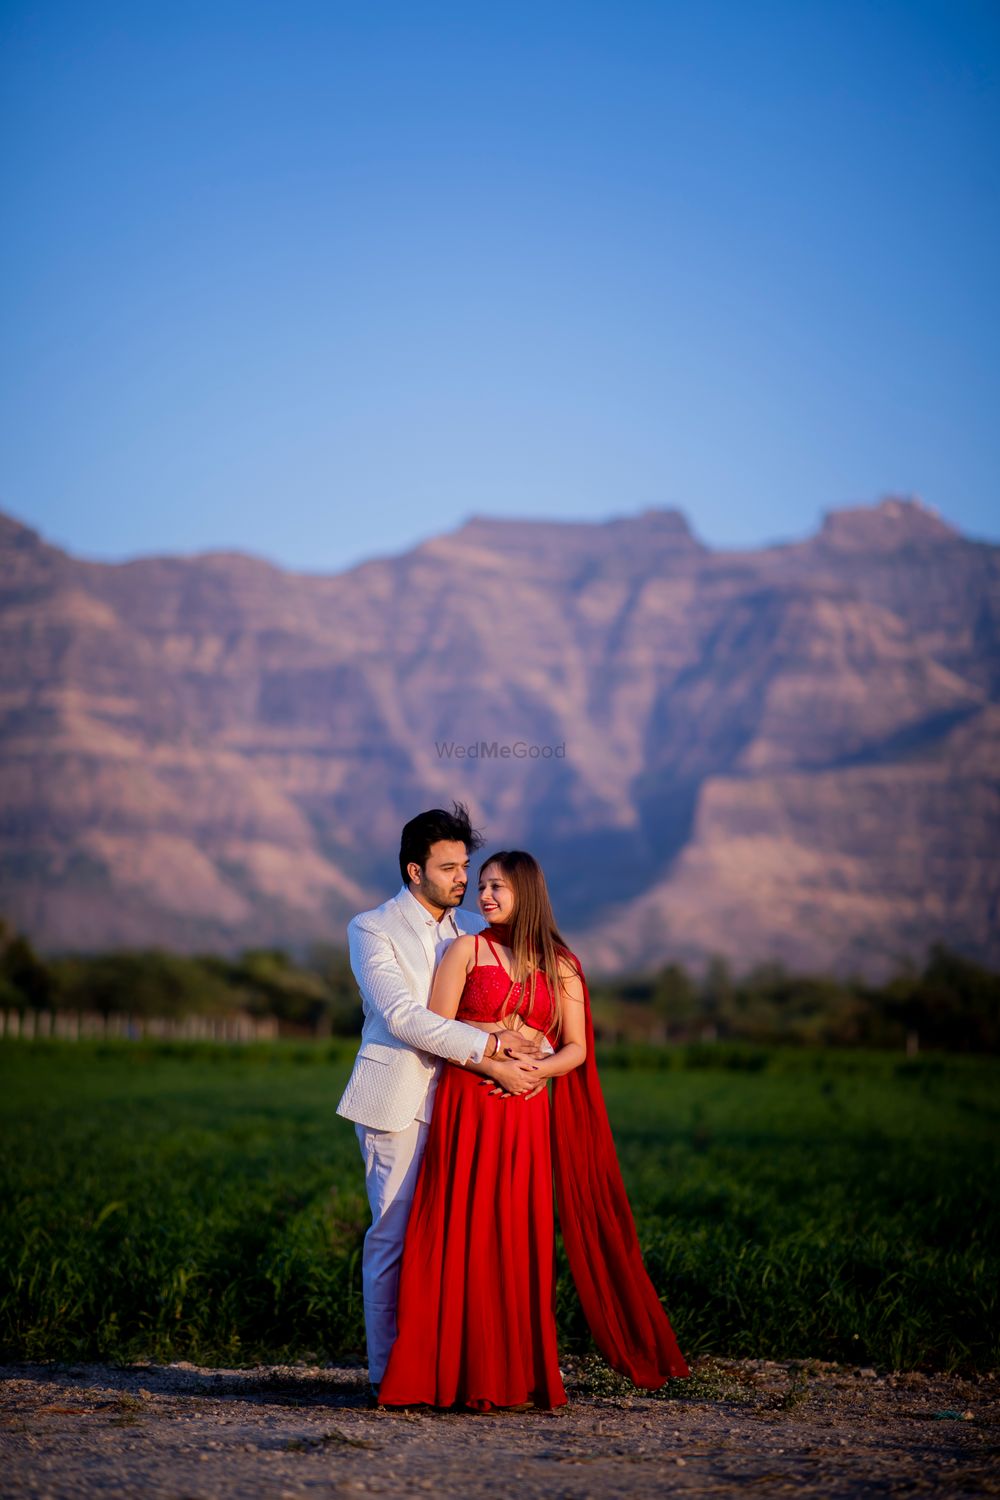 Photo From Prewedding  - By Gurwanis Clothing Co.